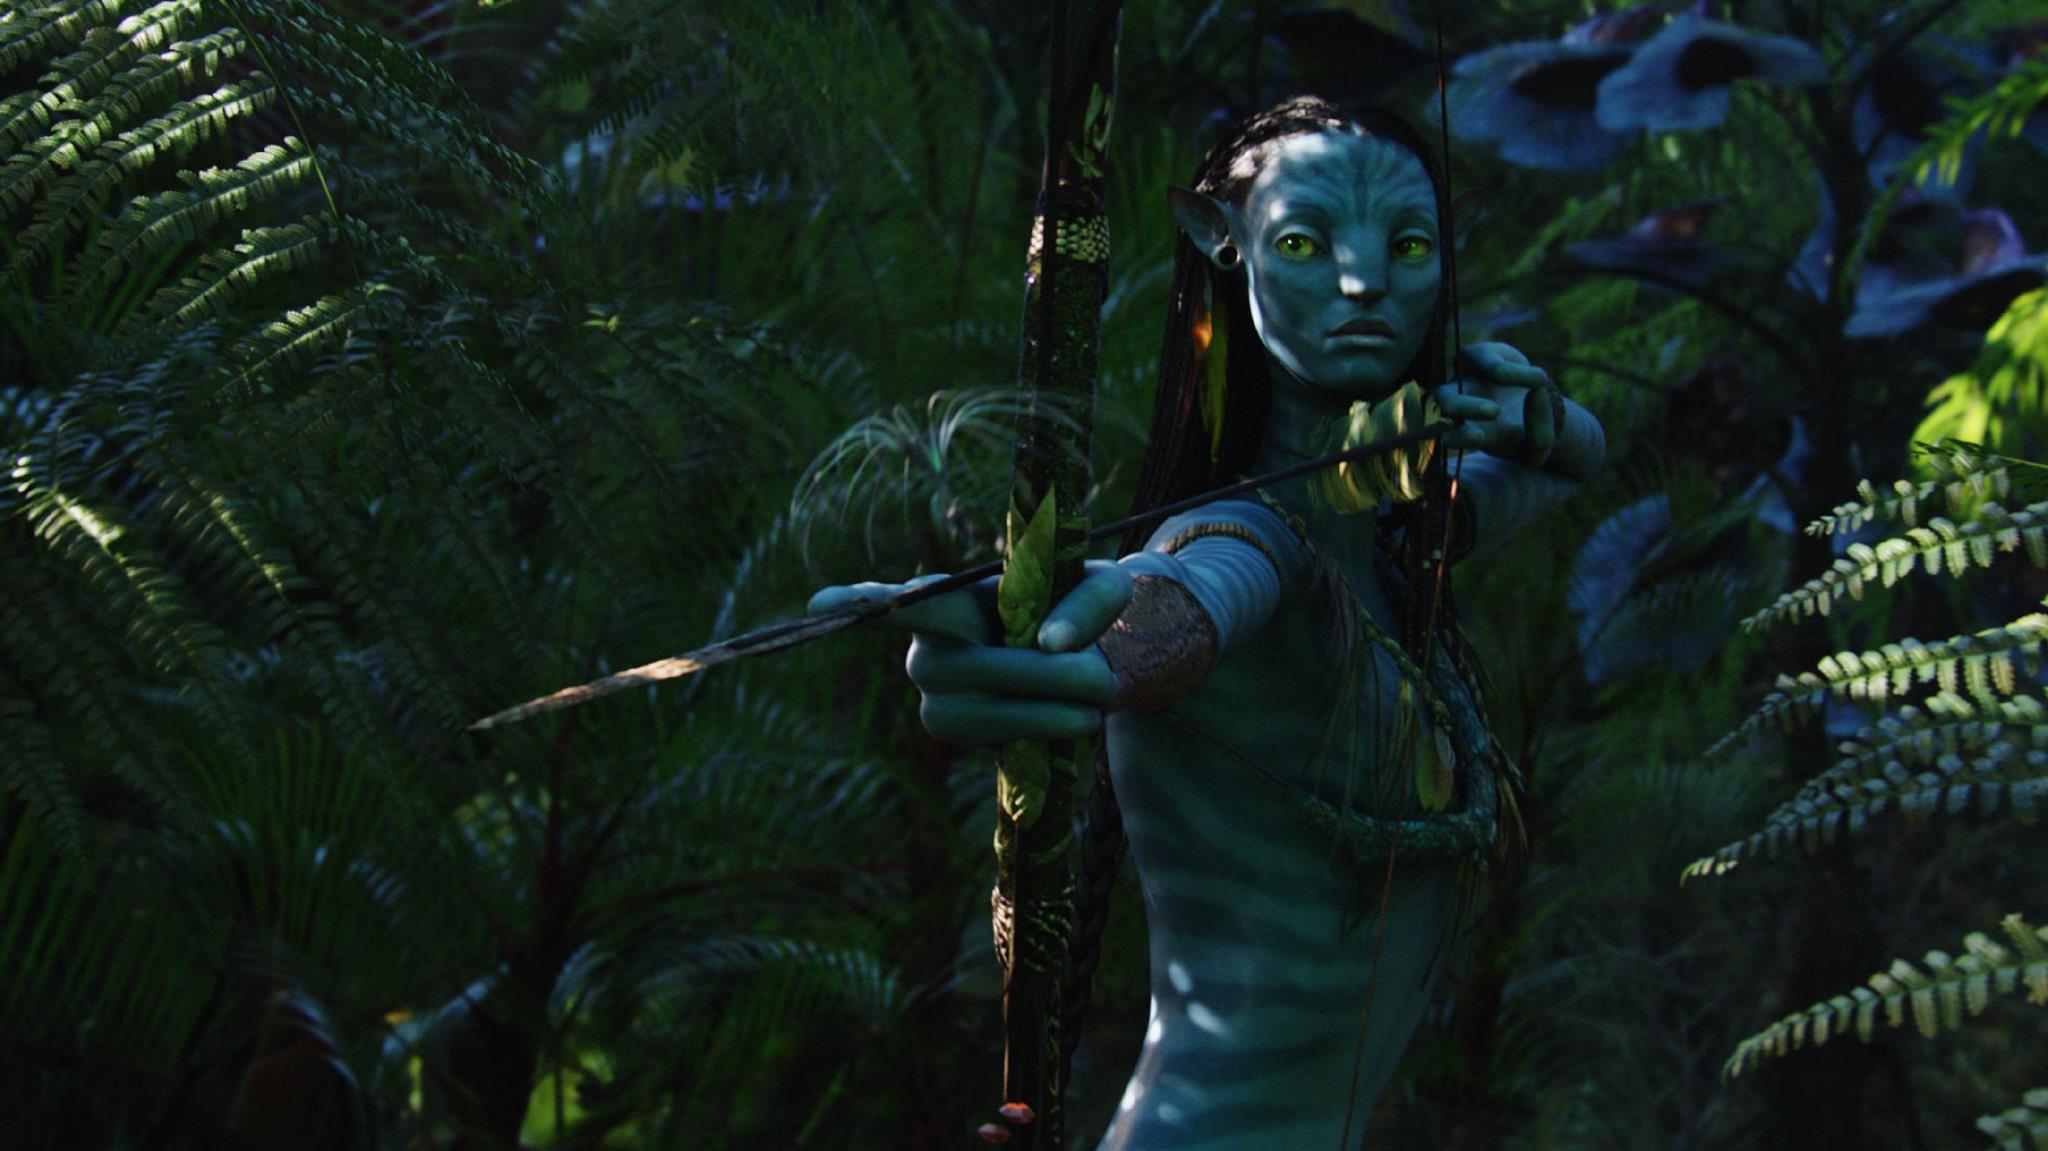 Avatar 2 and Avatar 3 cast wrapped filming – James Cameron announces via Twitter video